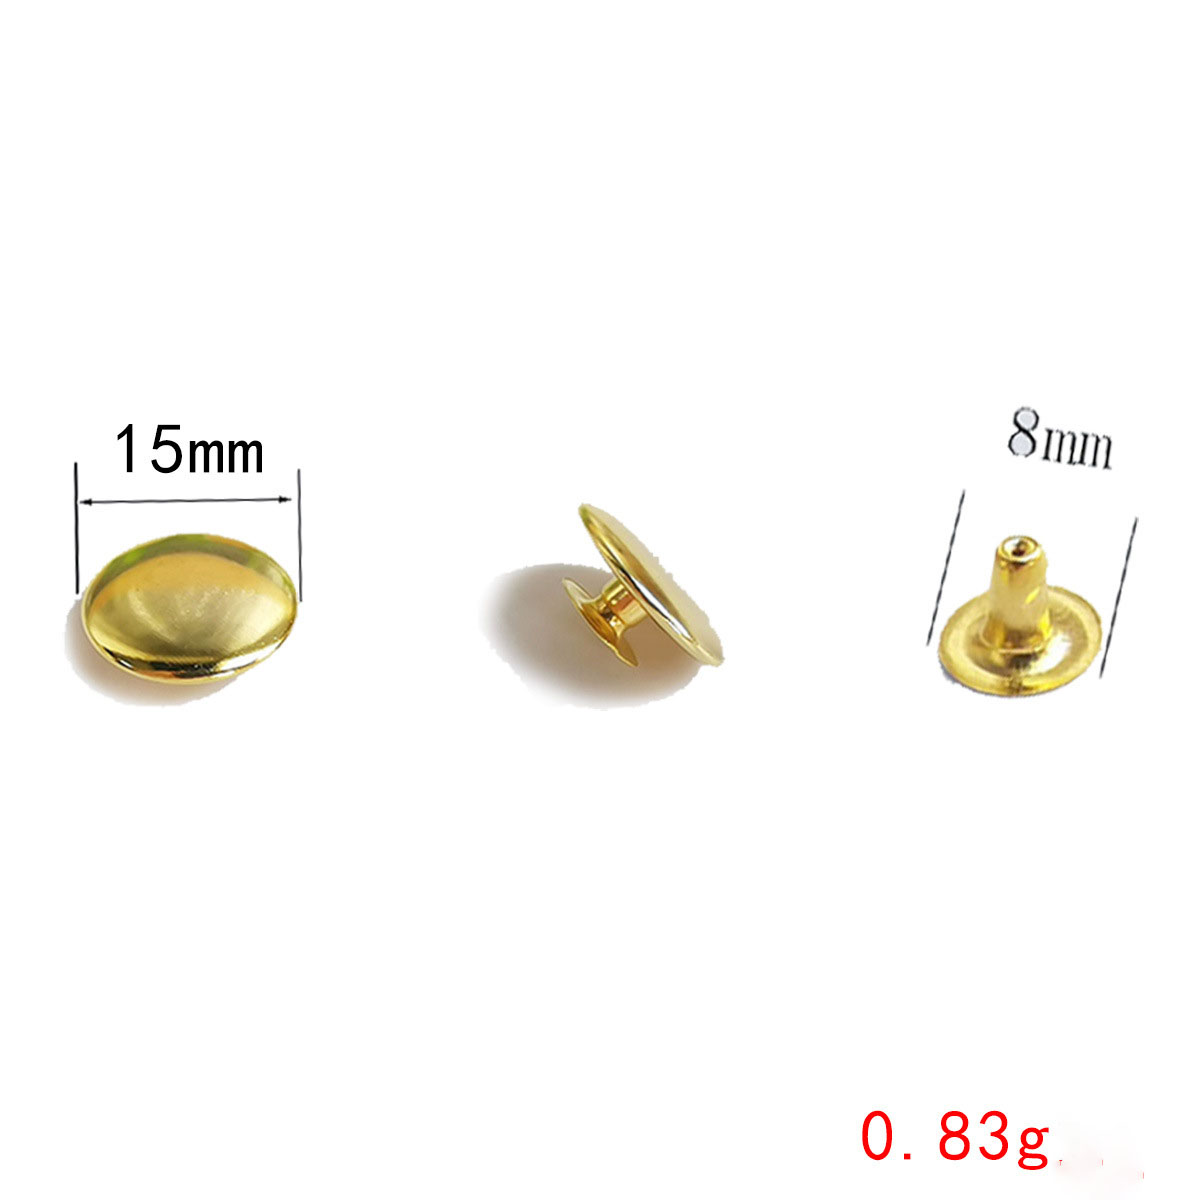 39:15mm gold